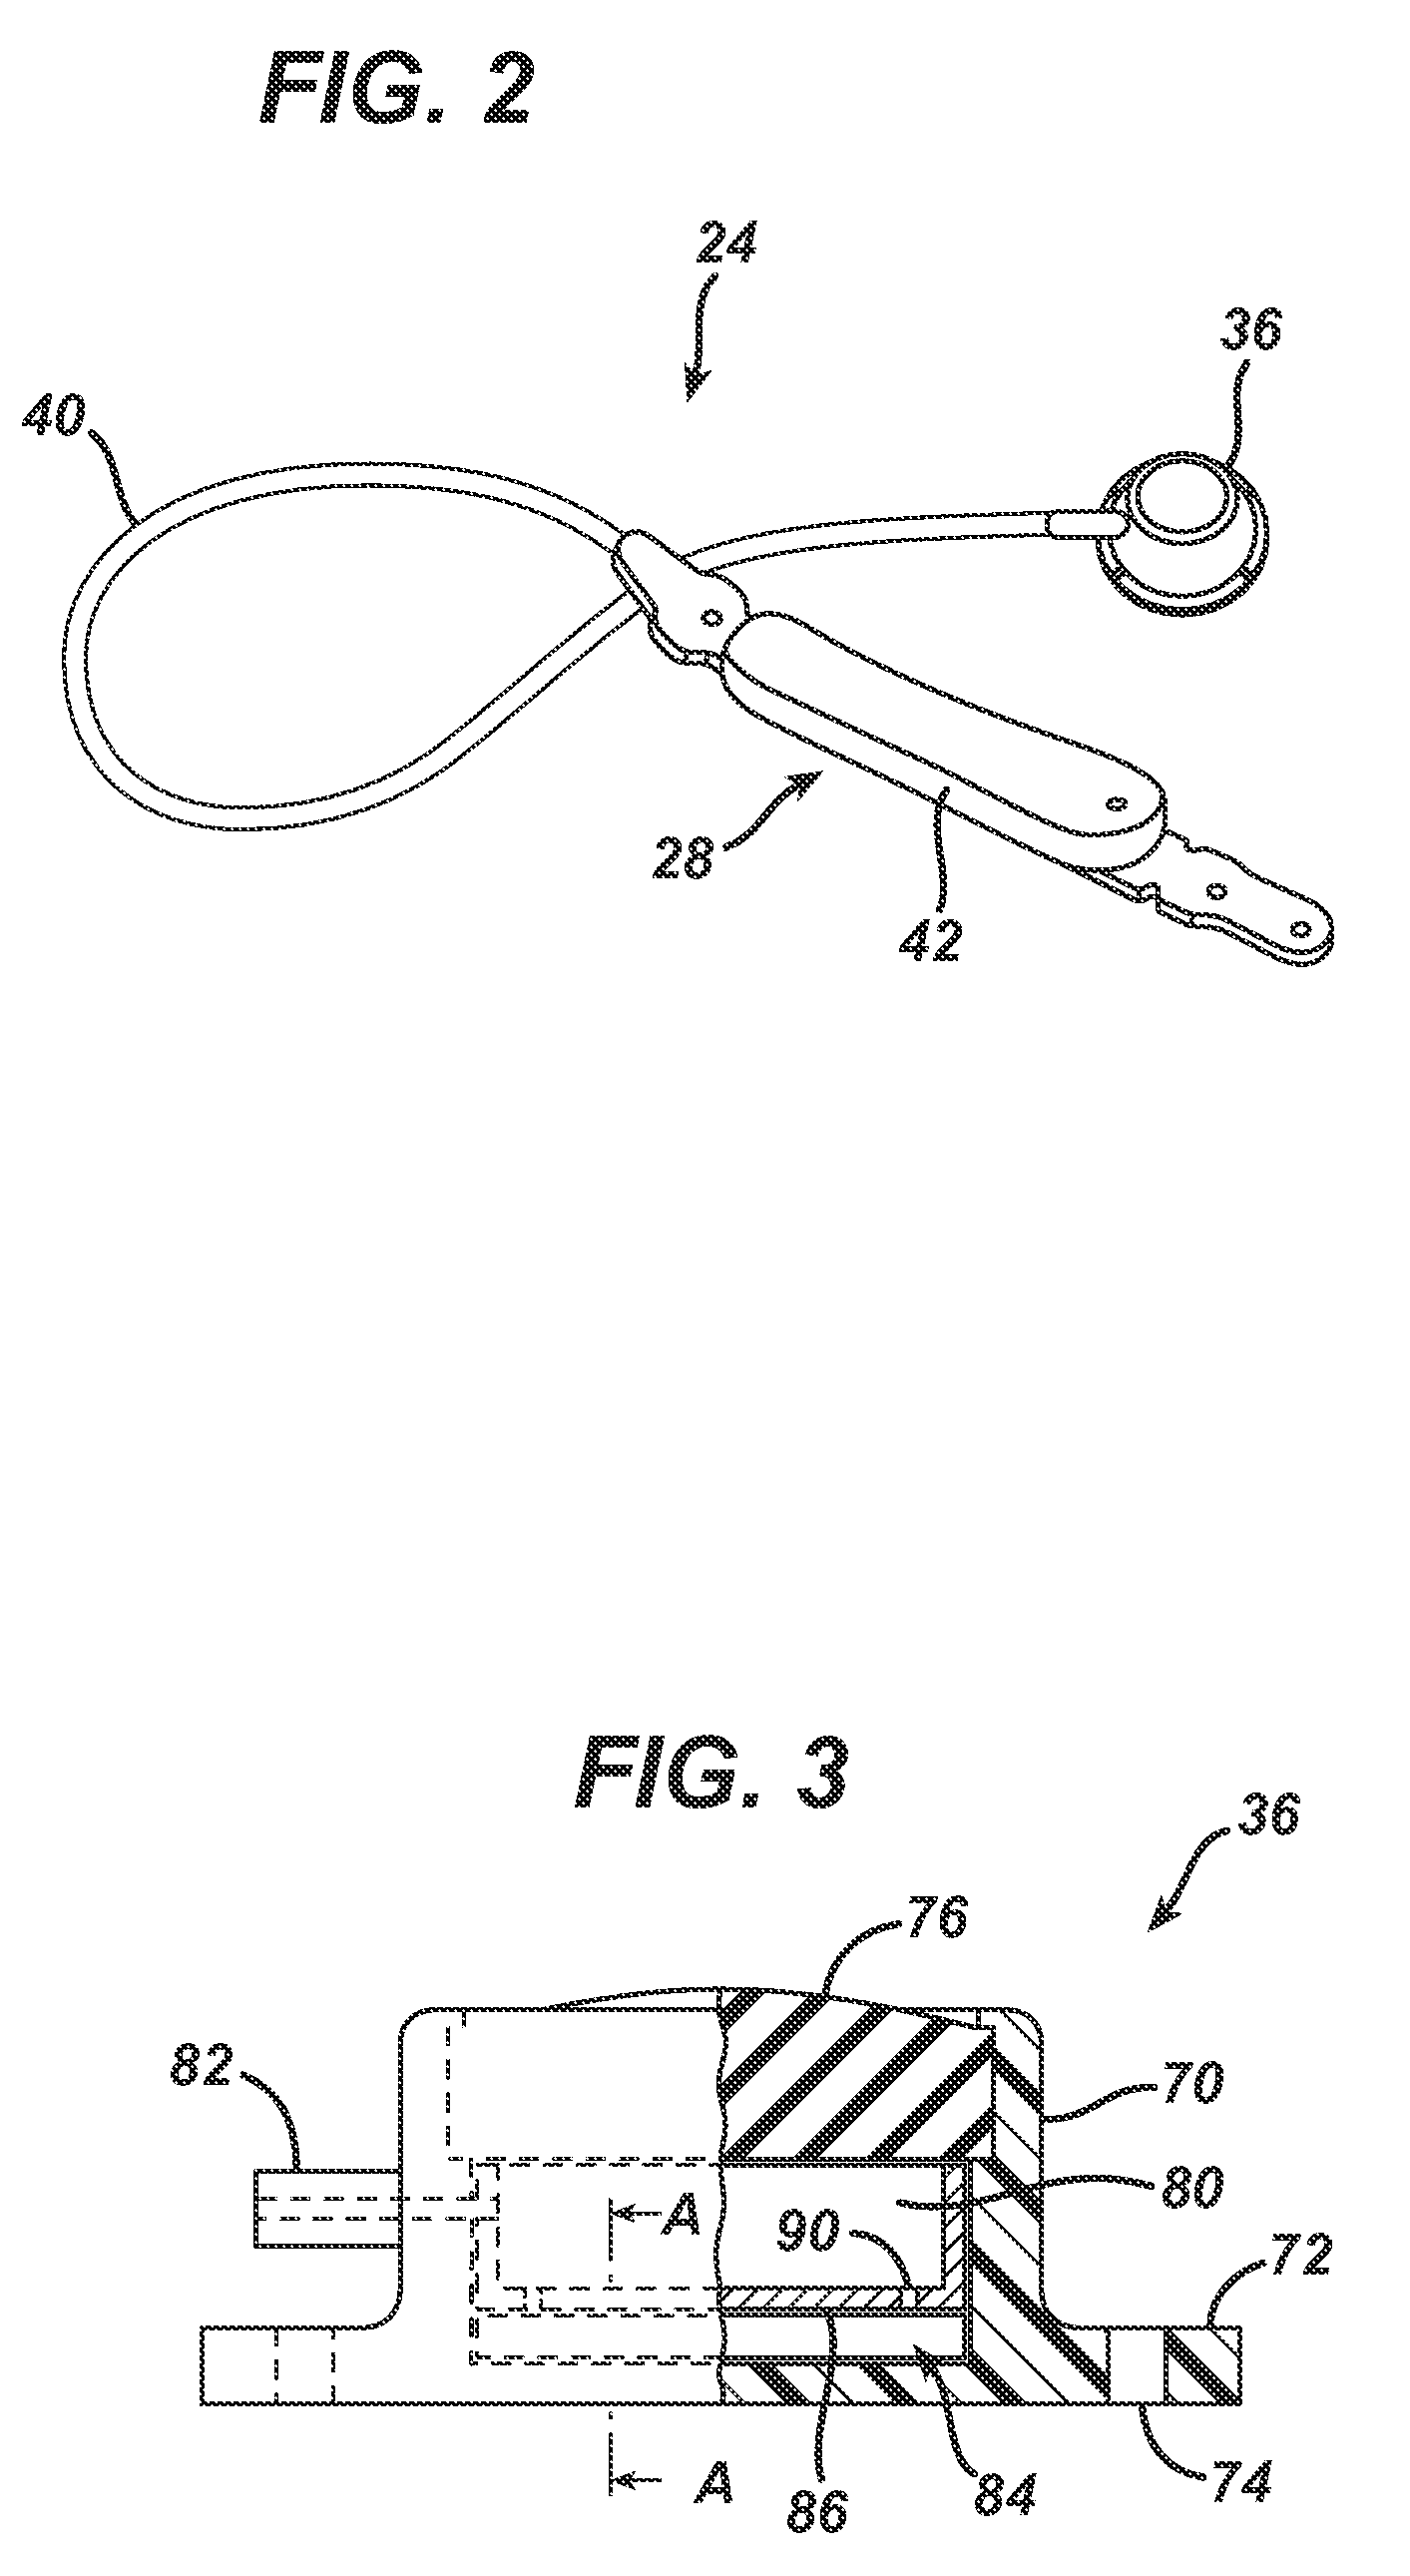 Physiological Parameter Analysis for an Implantable Restriction Device and a Data Logger